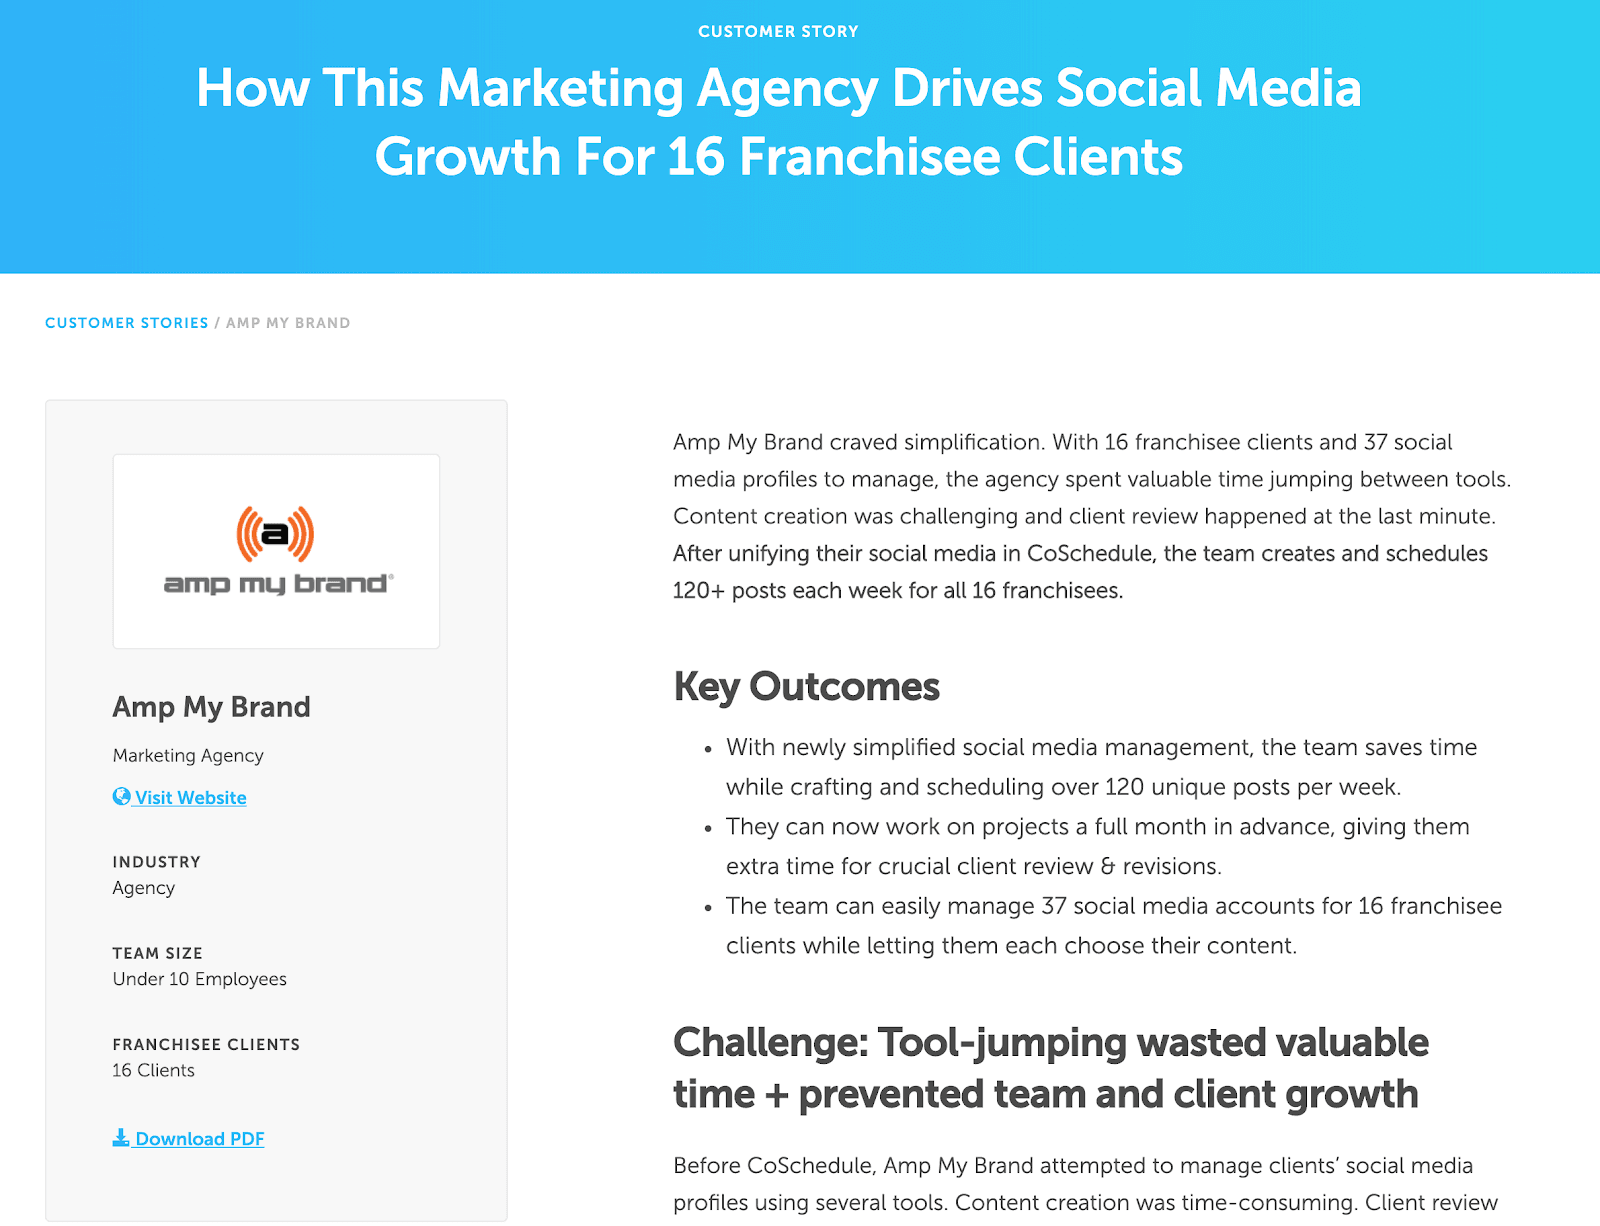 An example from a customer success story form Amp My Brand